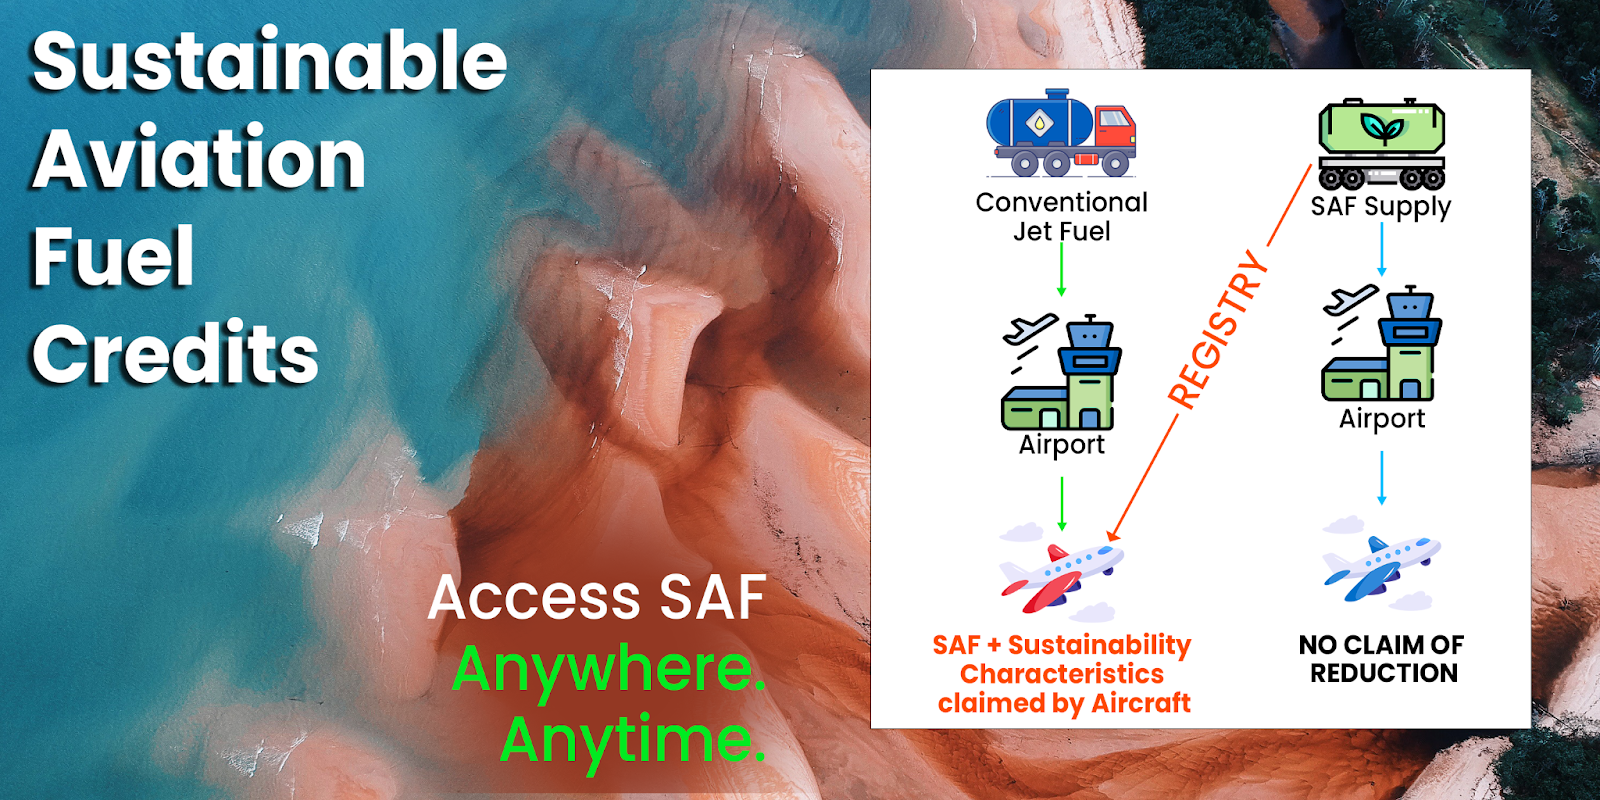 A visual representation how SAF is used in another place and all sustainability benefits will be claimed by the entity that has purchased SAF credits.